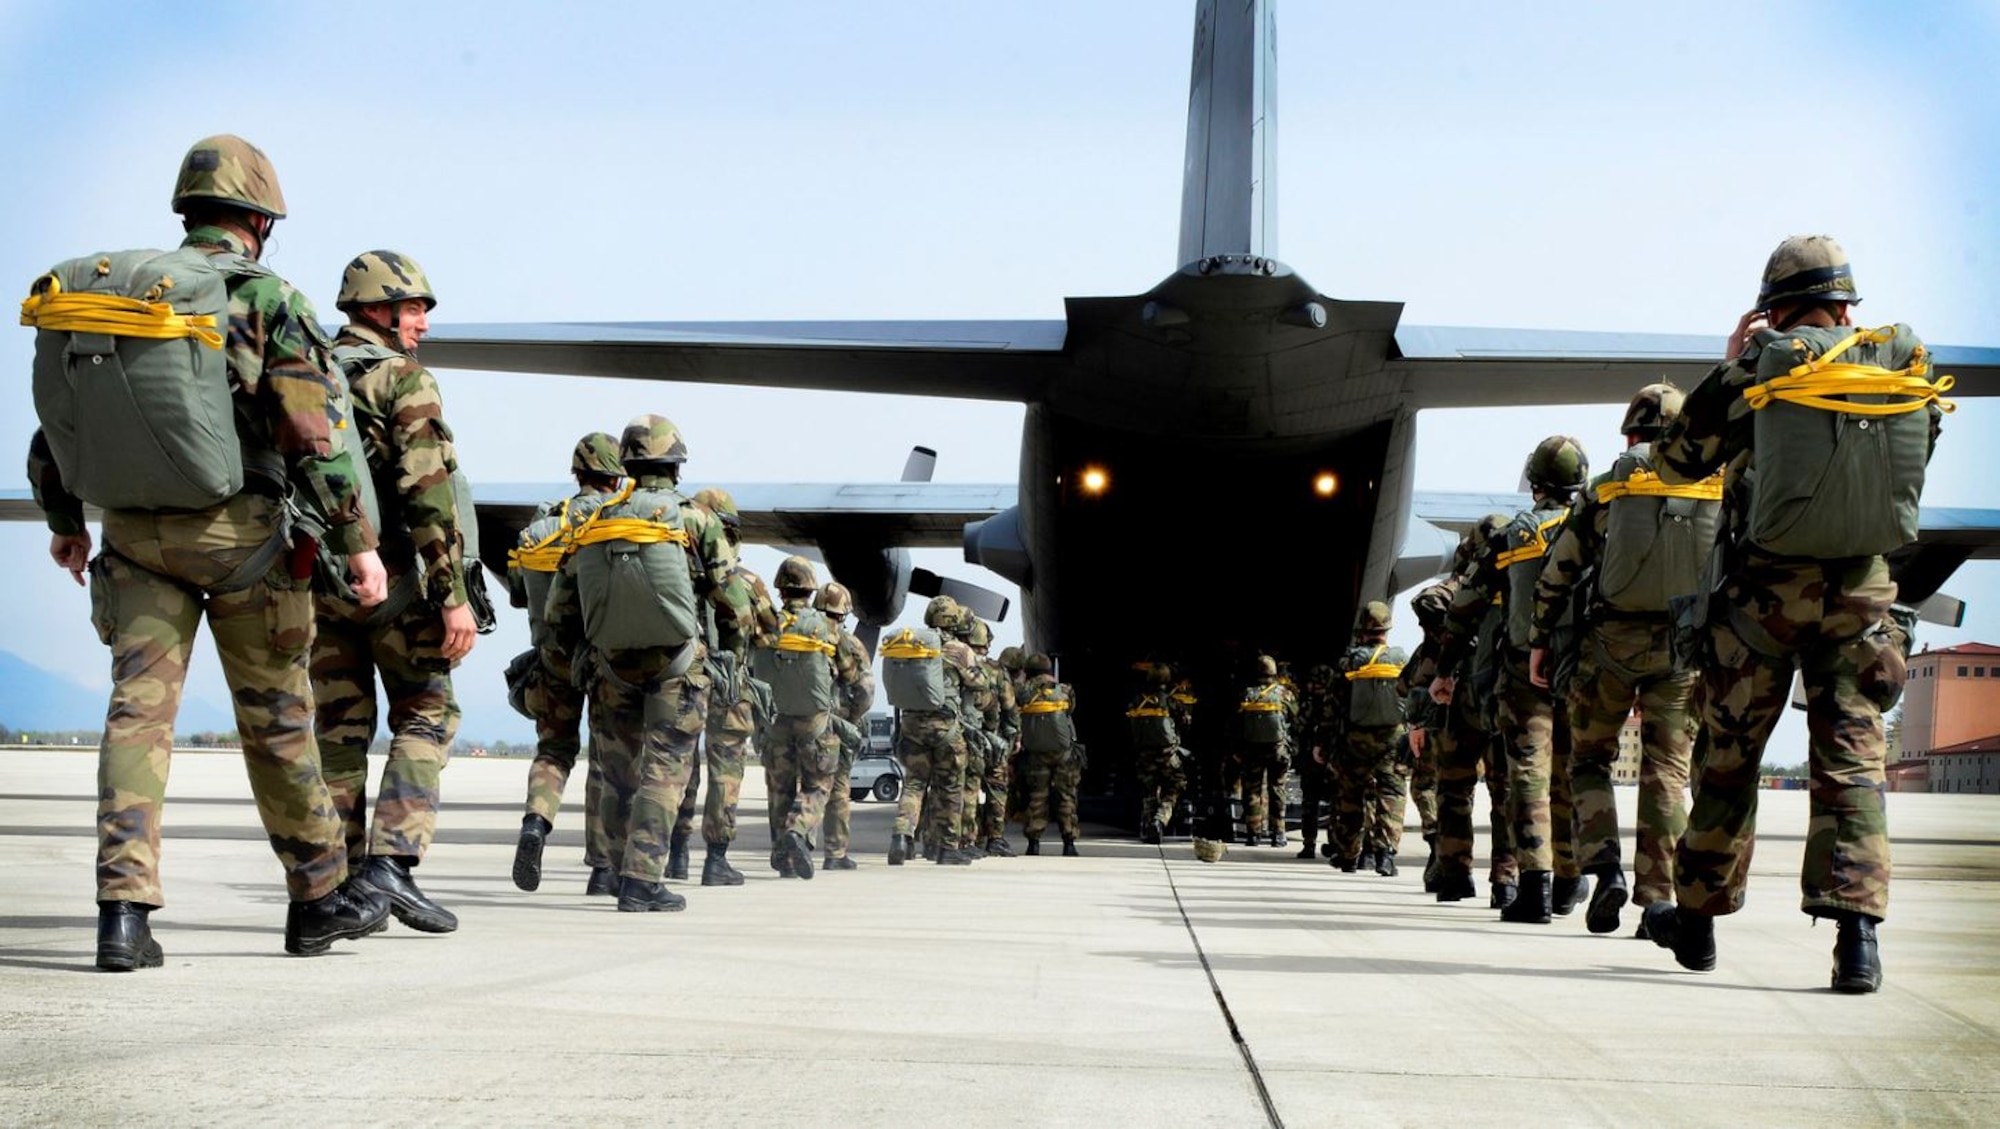 NATO service members prepare for a jump exchange prior to Saber Junction 16, April 5, 2016, at Aviano Air Base, Italy. The exercise involved the 173rd Airborne Brigade and 16 allied and European nations conducting land operations in a joint, combined environment and to promote interoperability with participating nations. (U.S. Air Force photo by Senior Airman Areca T. Bell/Released)